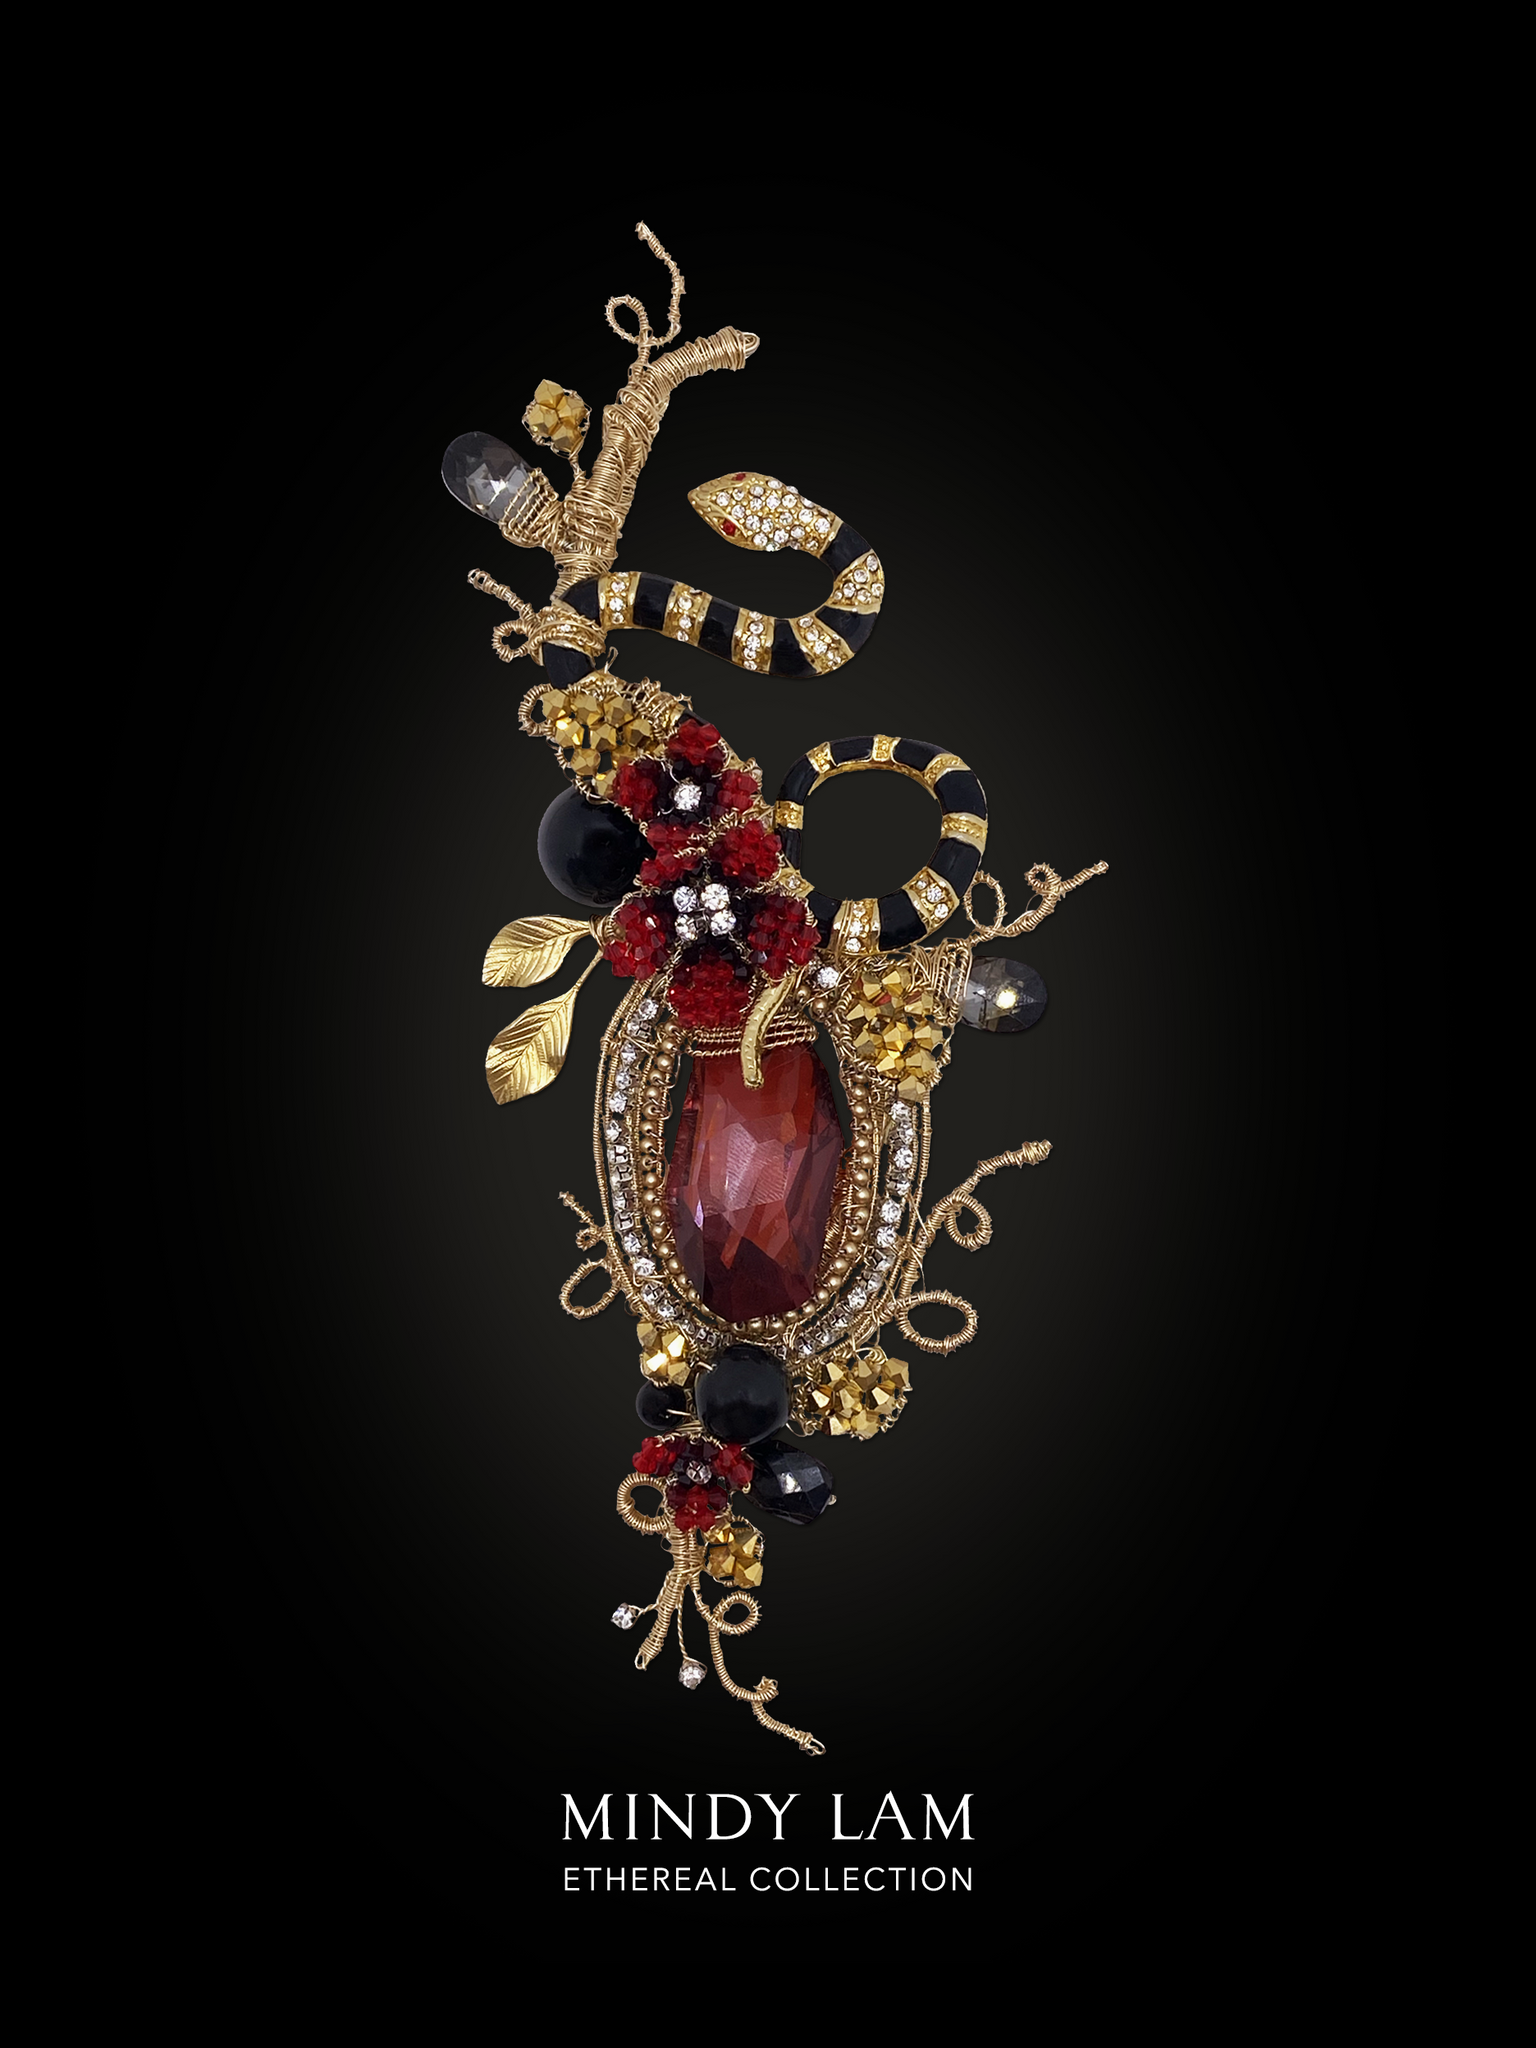 Ethereal Collection Lapel Pin - The Jeweled Serpent